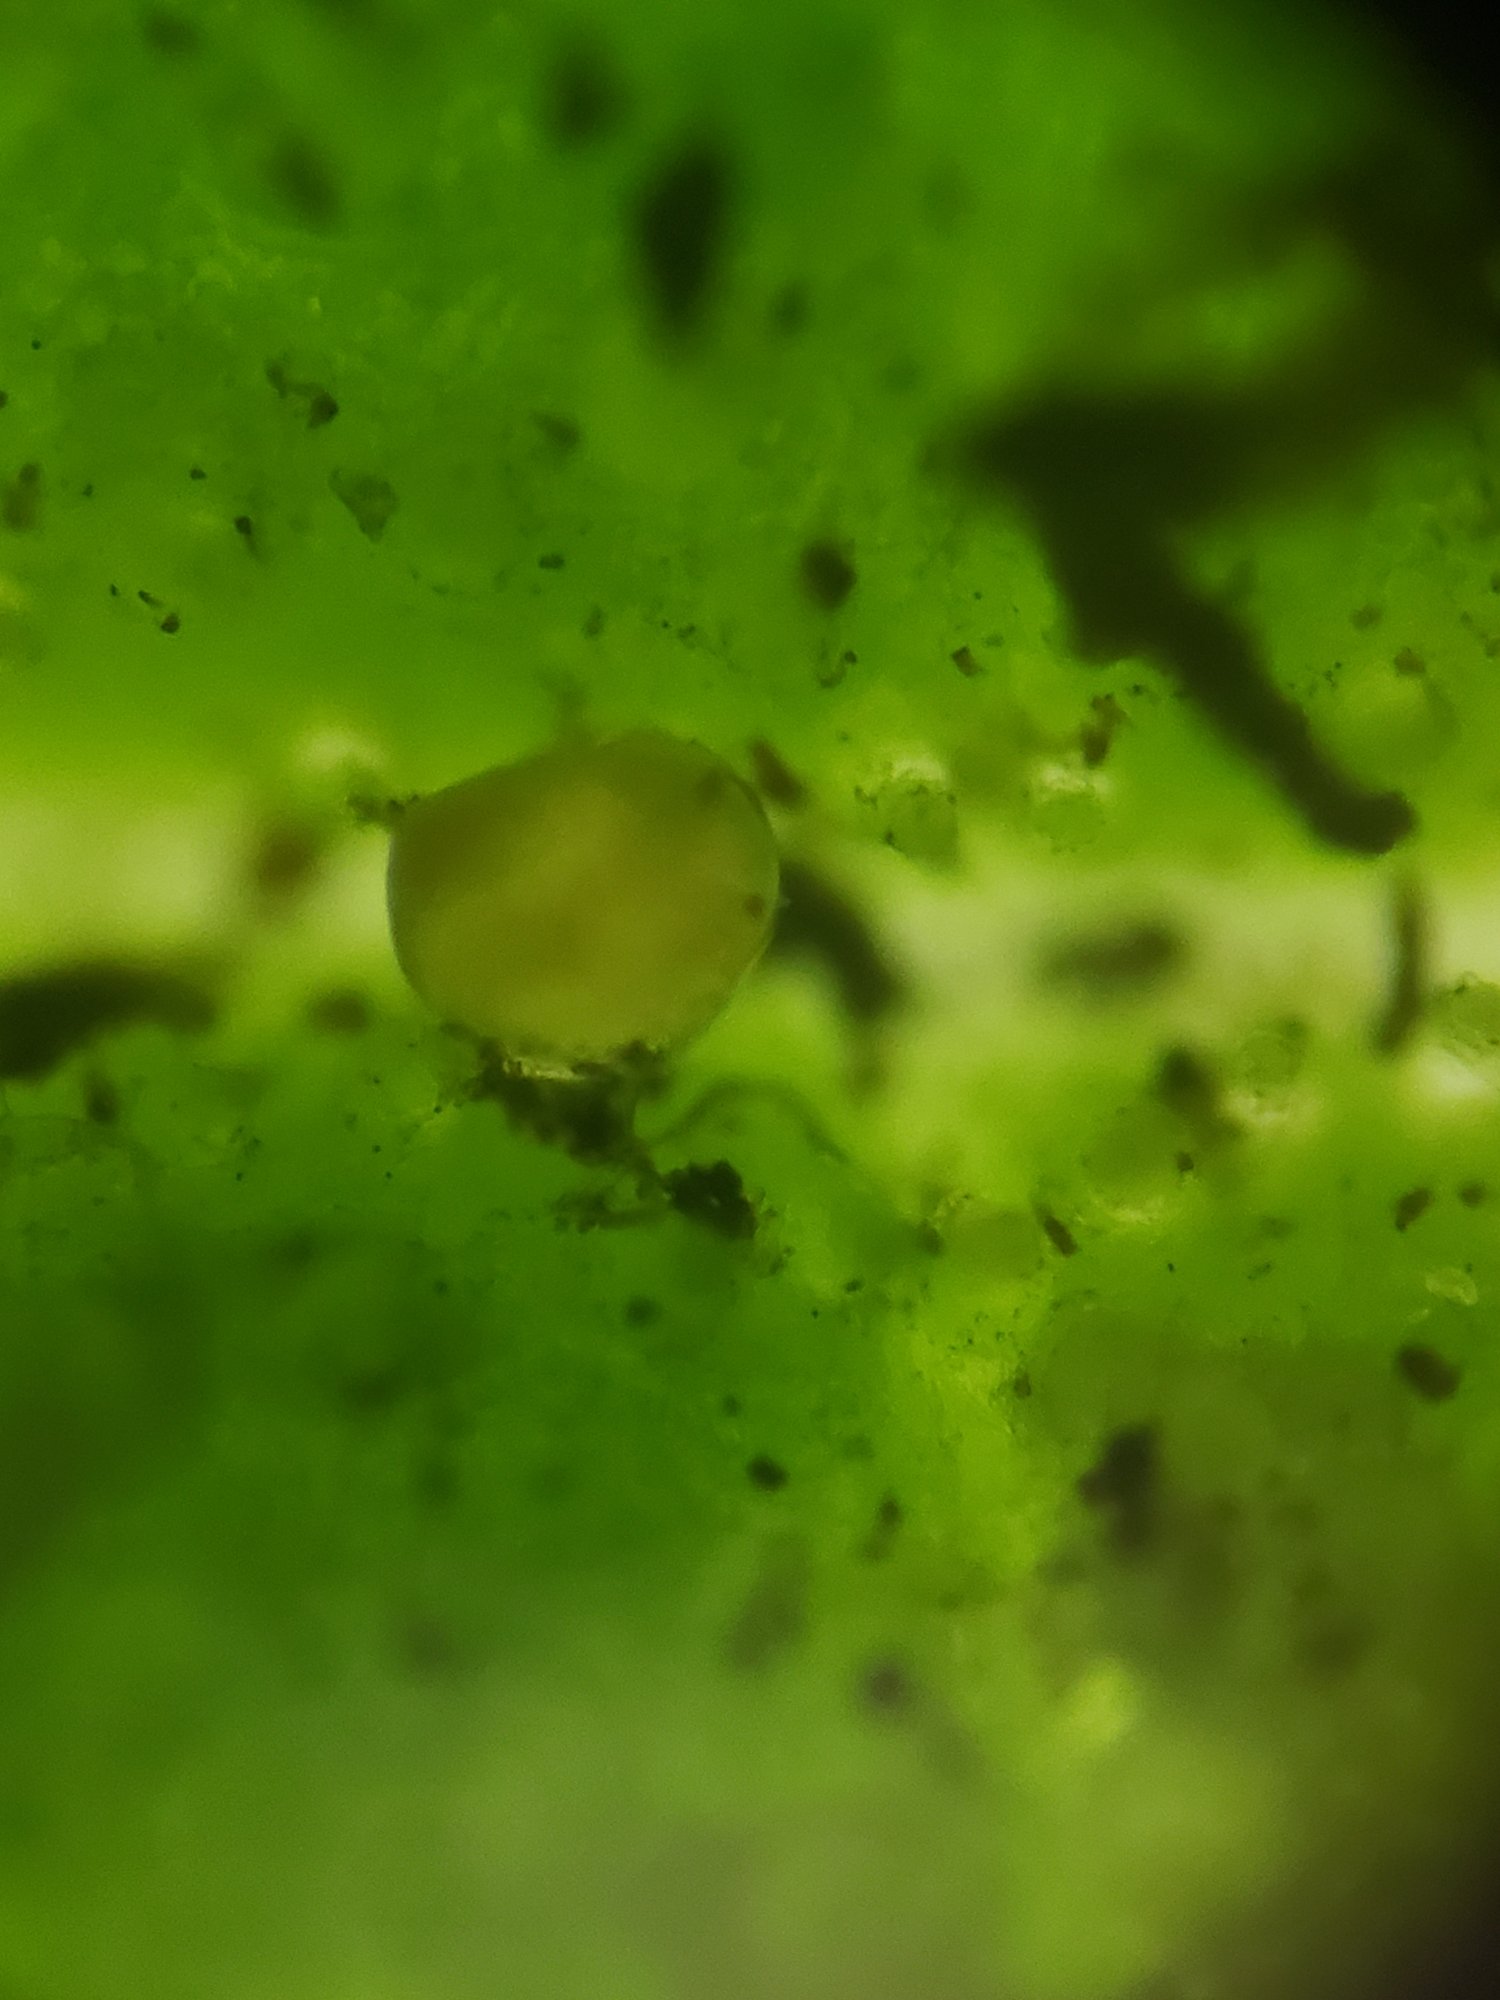 Spider mite on 1 plant pics included 5